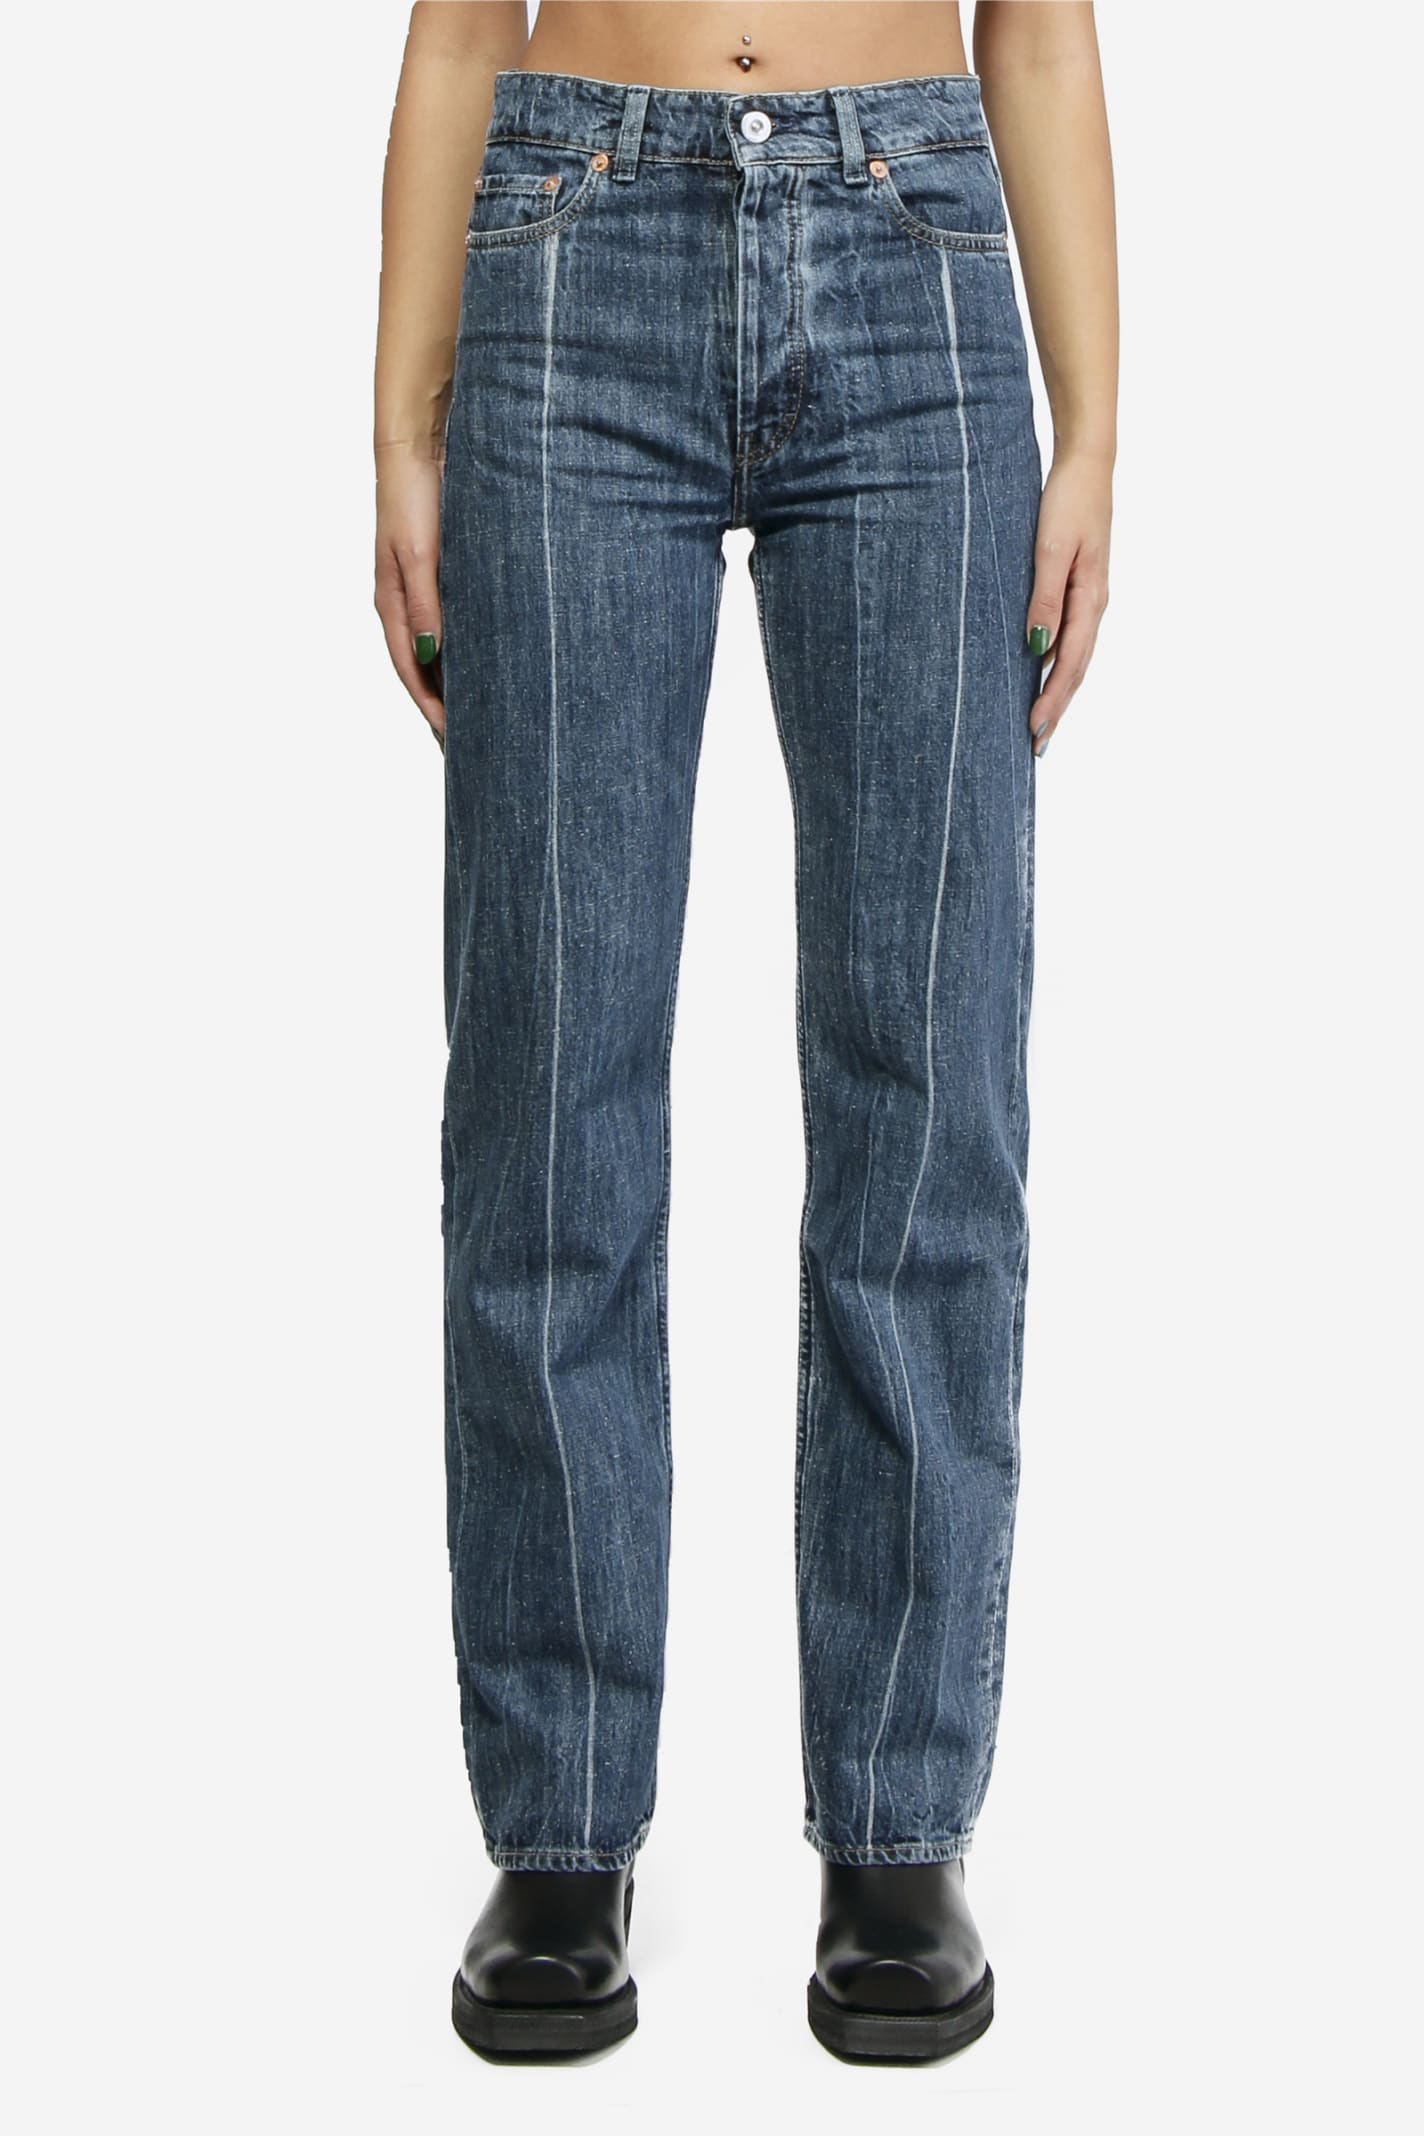 Our Legacy Linear Cut Jeans